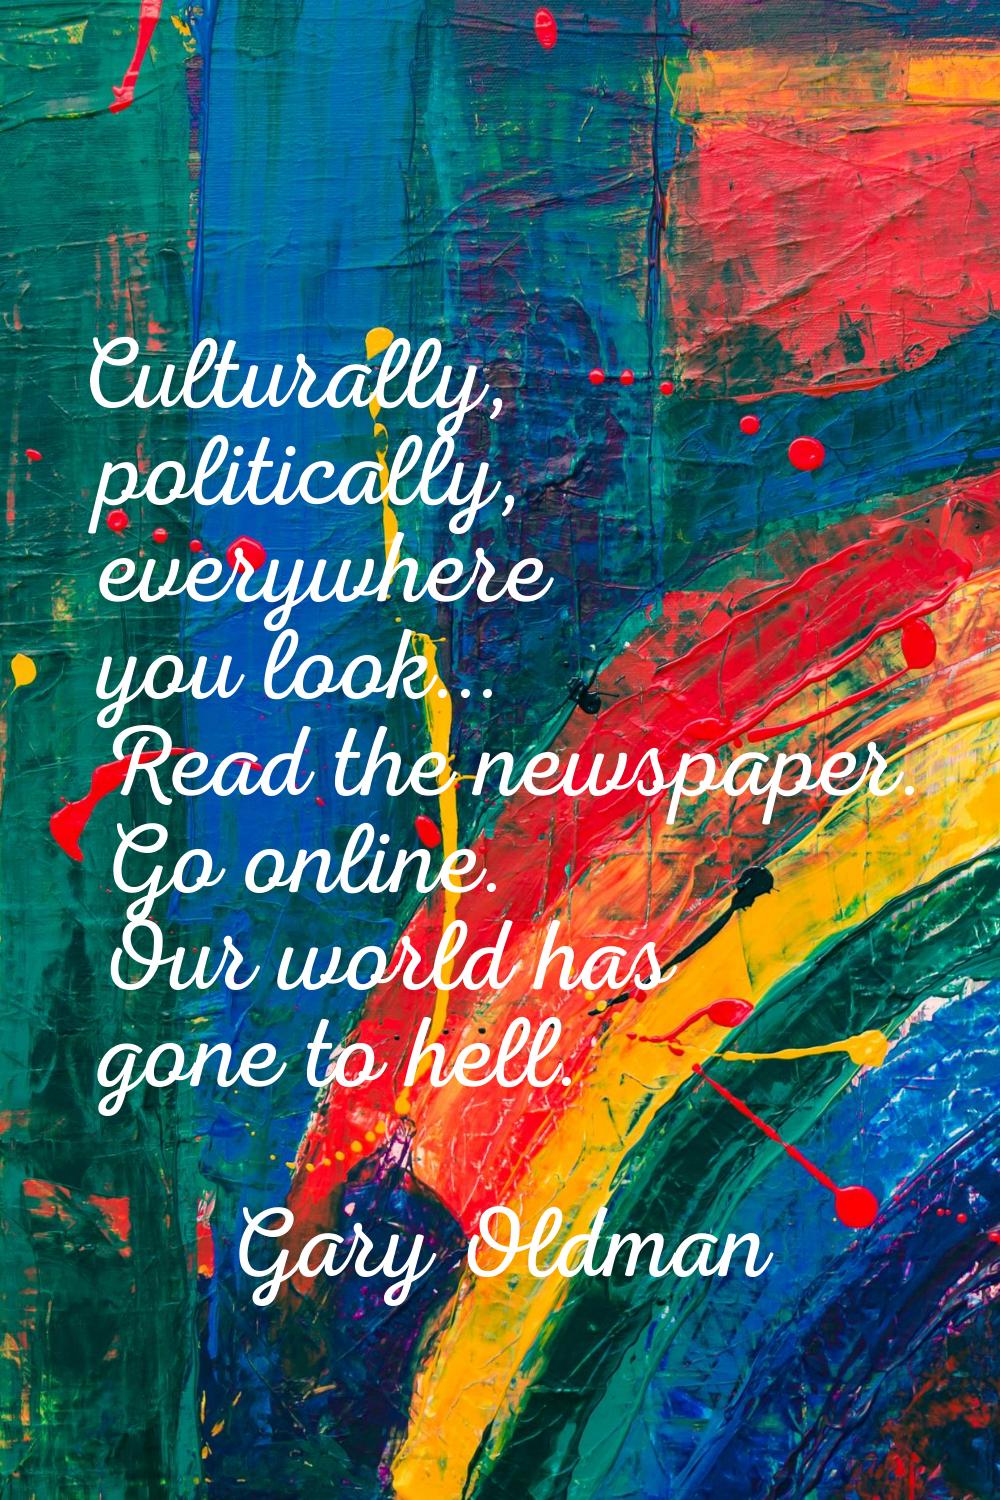 Culturally, politically, everywhere you look... Read the newspaper. Go online. Our world has gone t